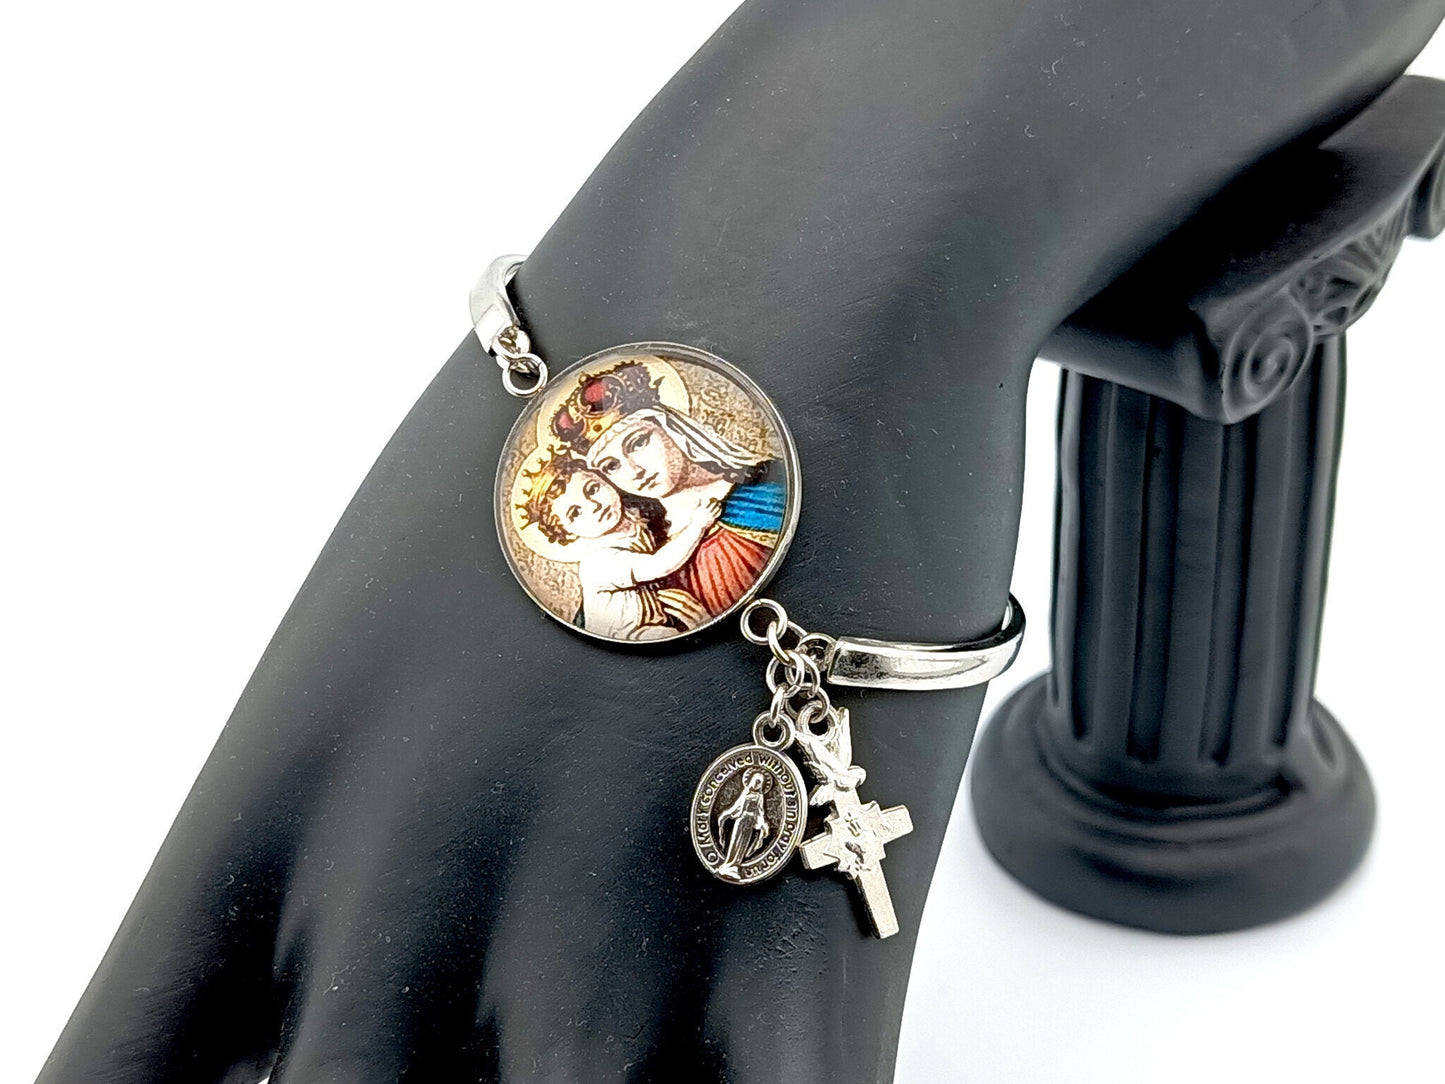 Our Lady Helper of Christians unique rosary beads bracelet with stainless steel bangle, clasp and picture medal.